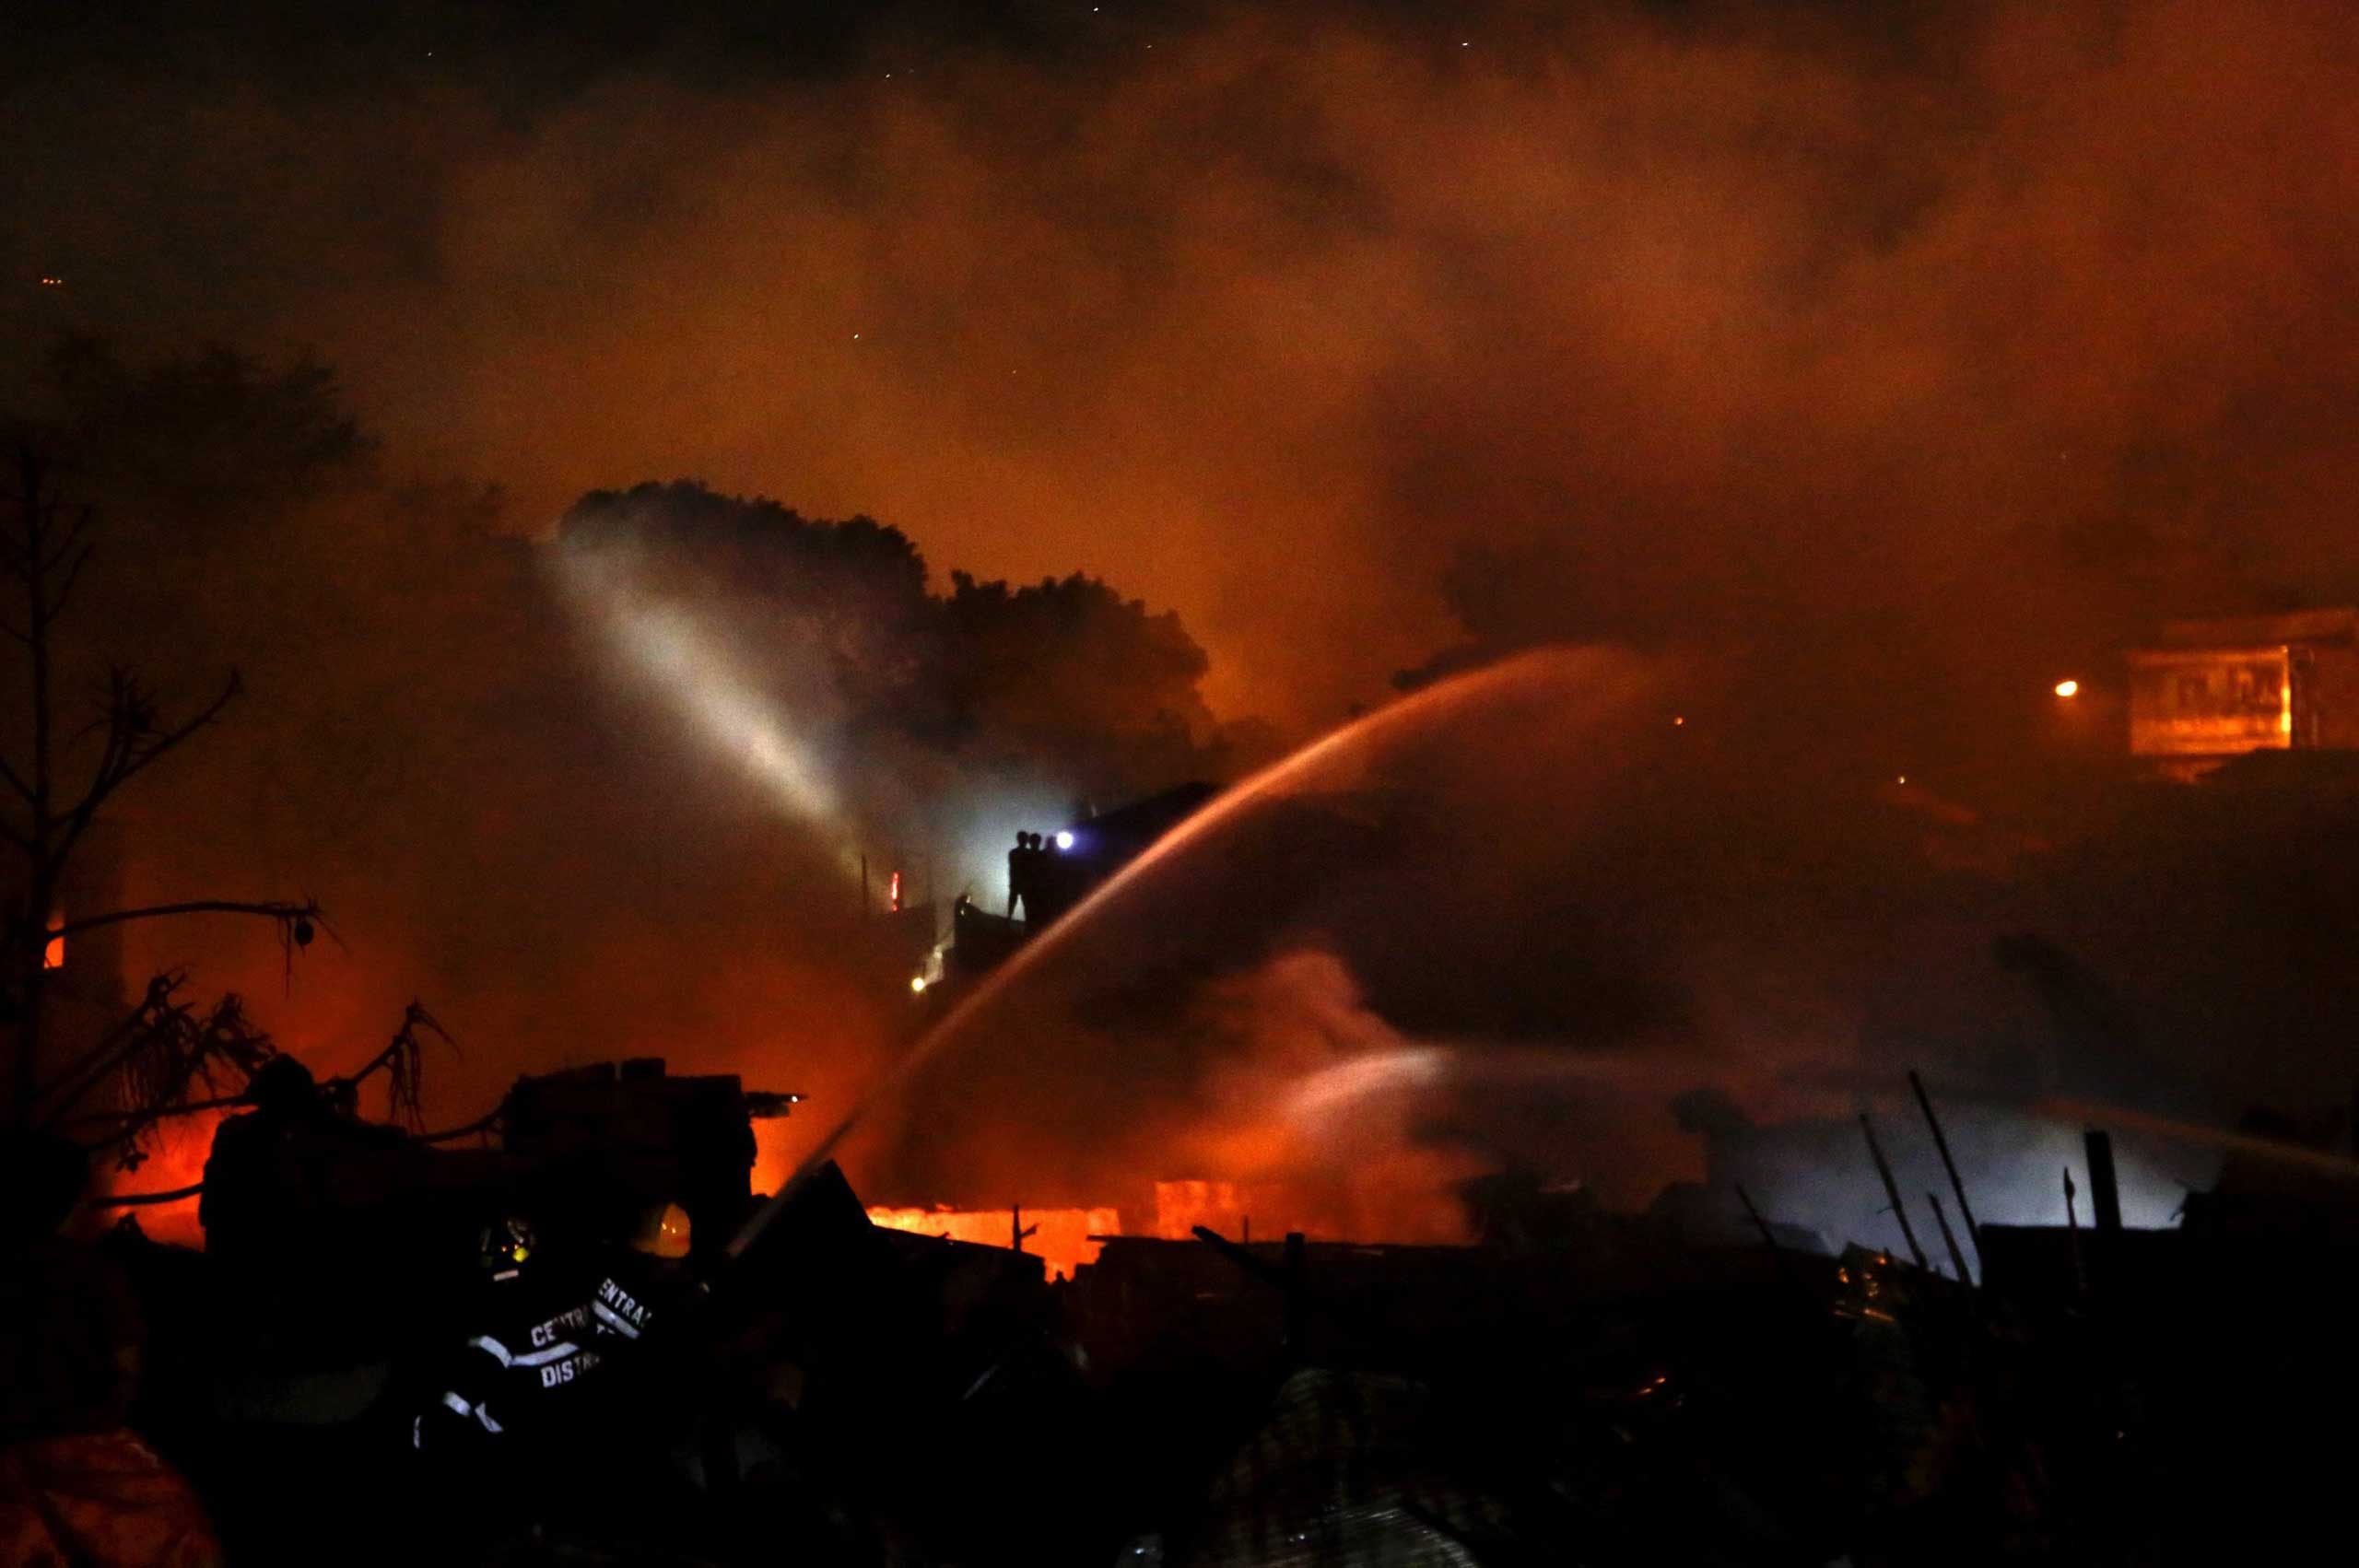 Filipino firemen use water cannon to extinguish a fire in a residential slum area in Quezon City, east of Manila, Philippines, May 6, 2014. T